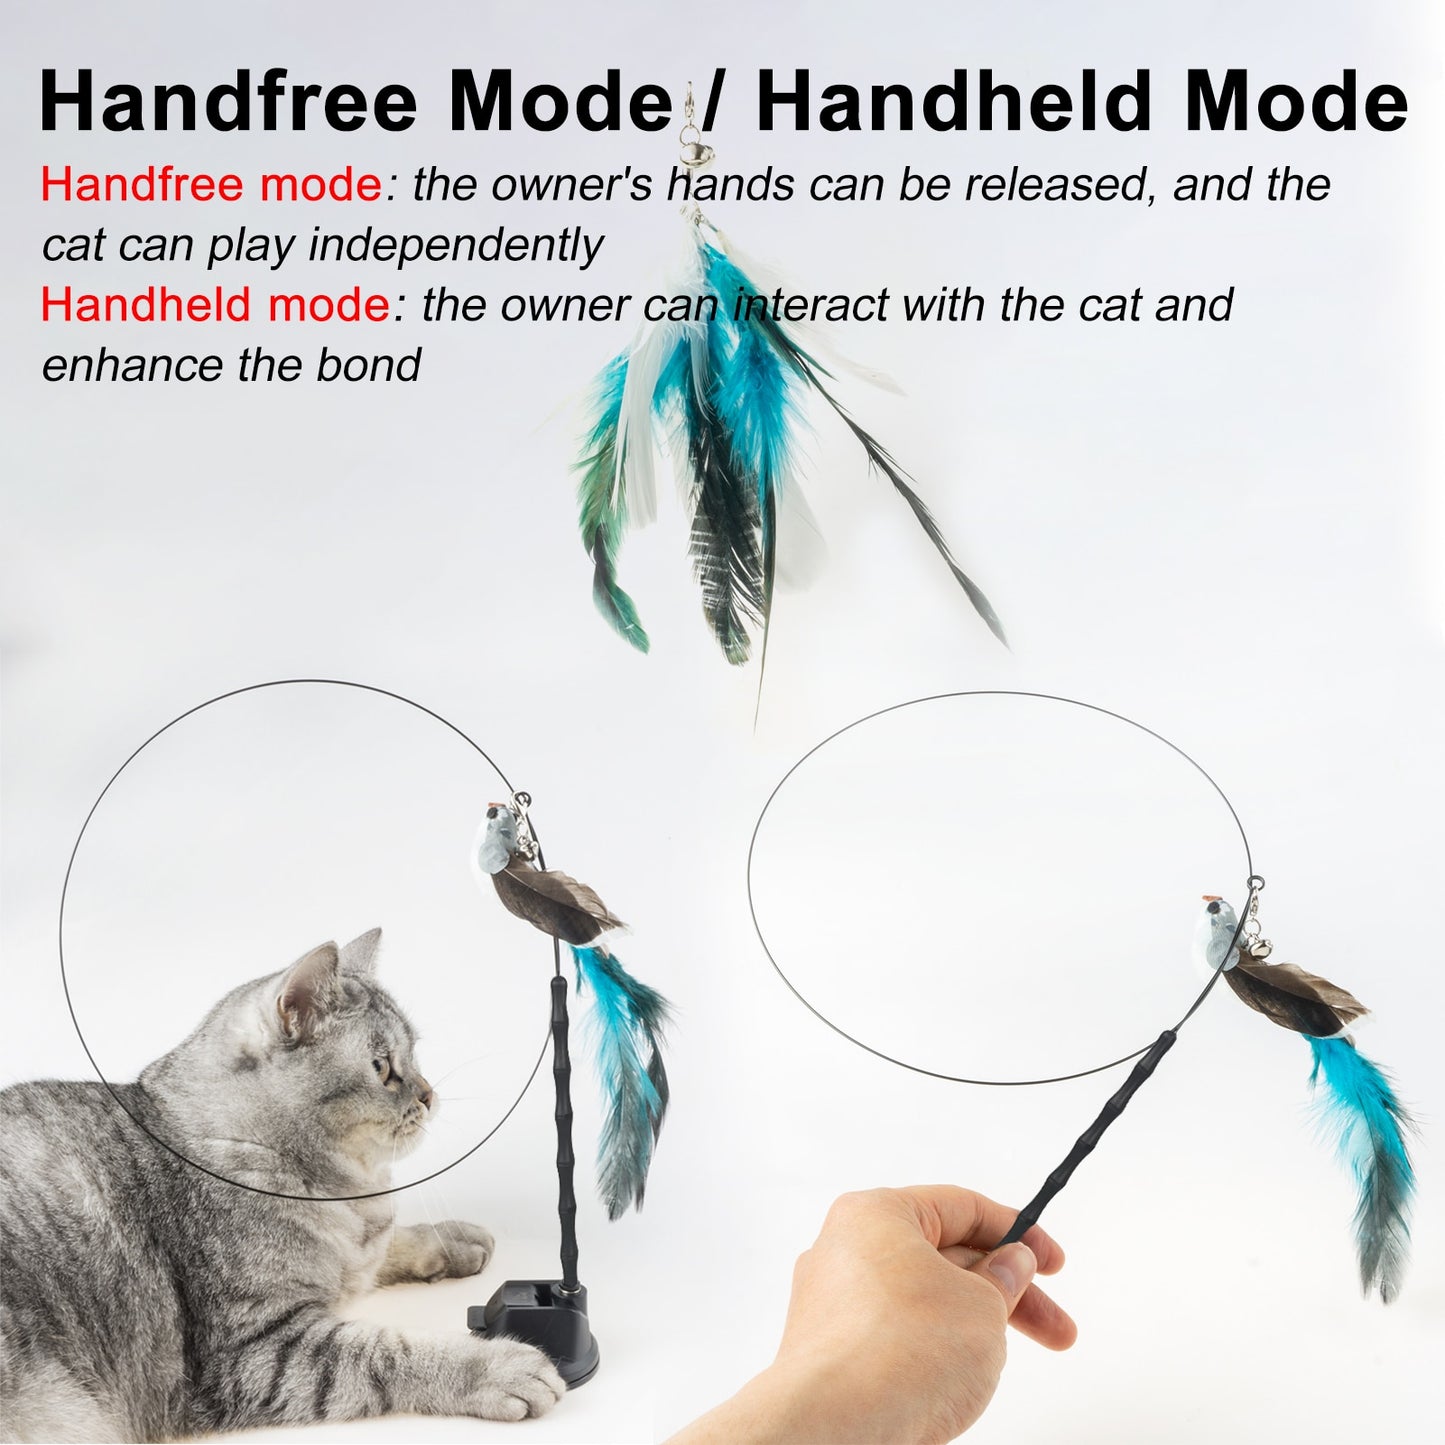 Handree mode and handheld mode Close-up of Interactive Cat Wand